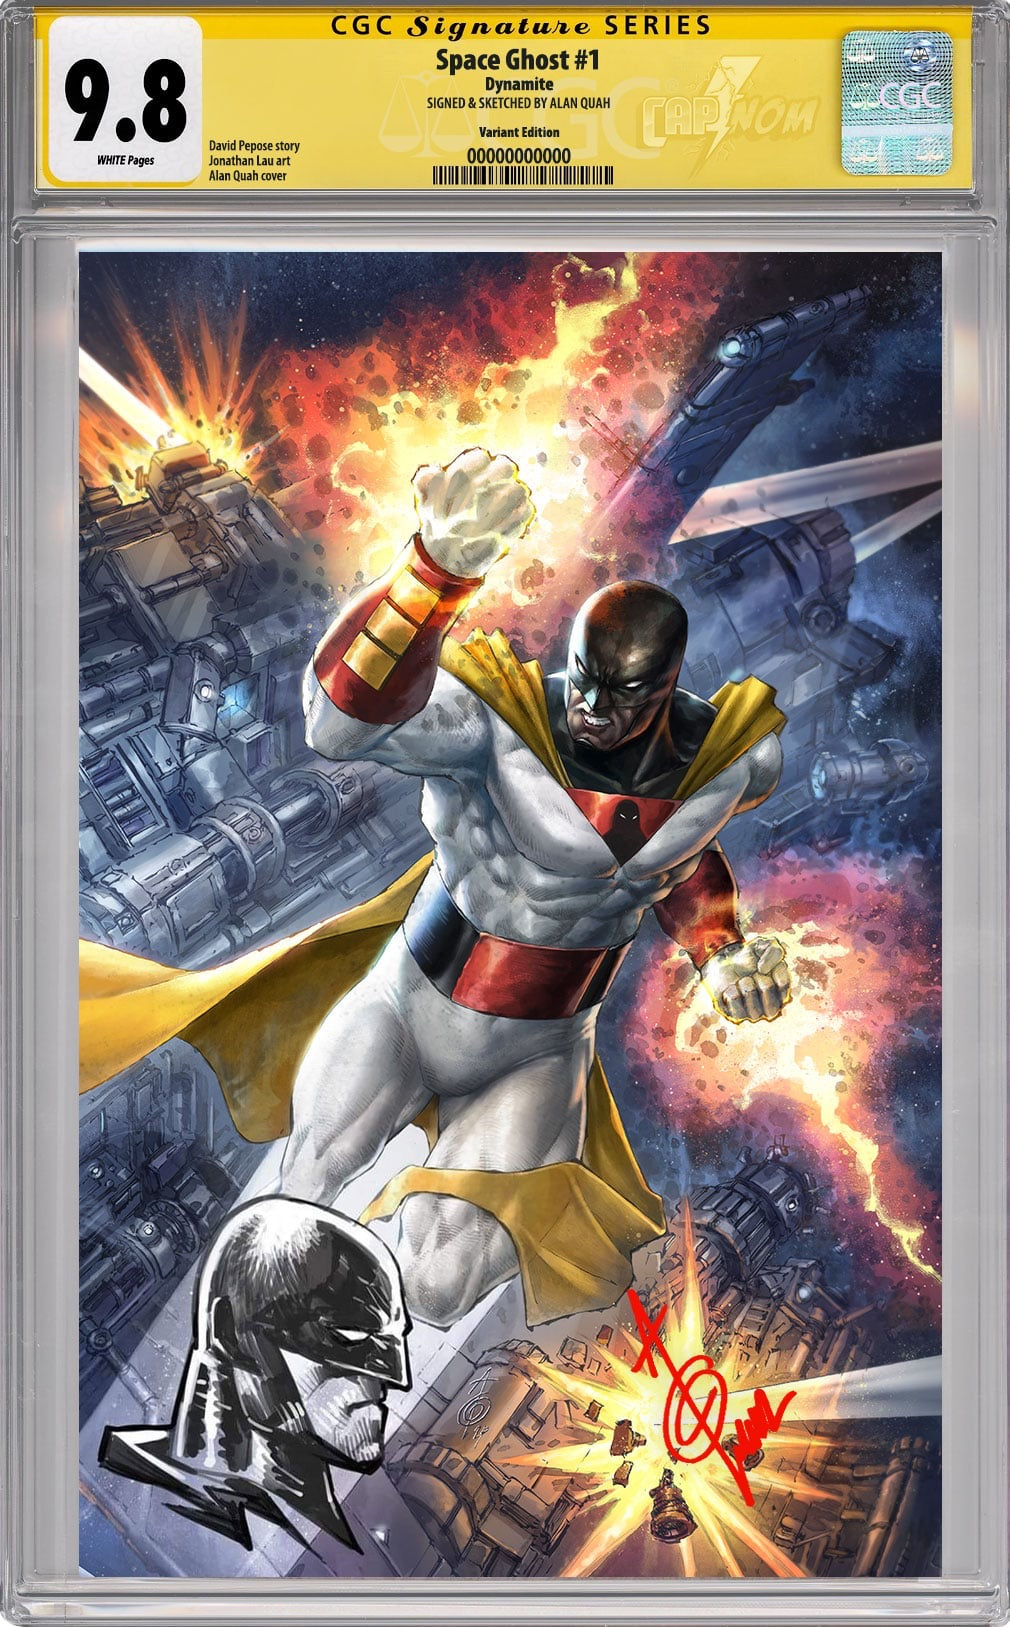 Space Ghost #1 Full Wraparound Virgin Cover CGC SS 9.8 Signed & Remarked by Alan Quah